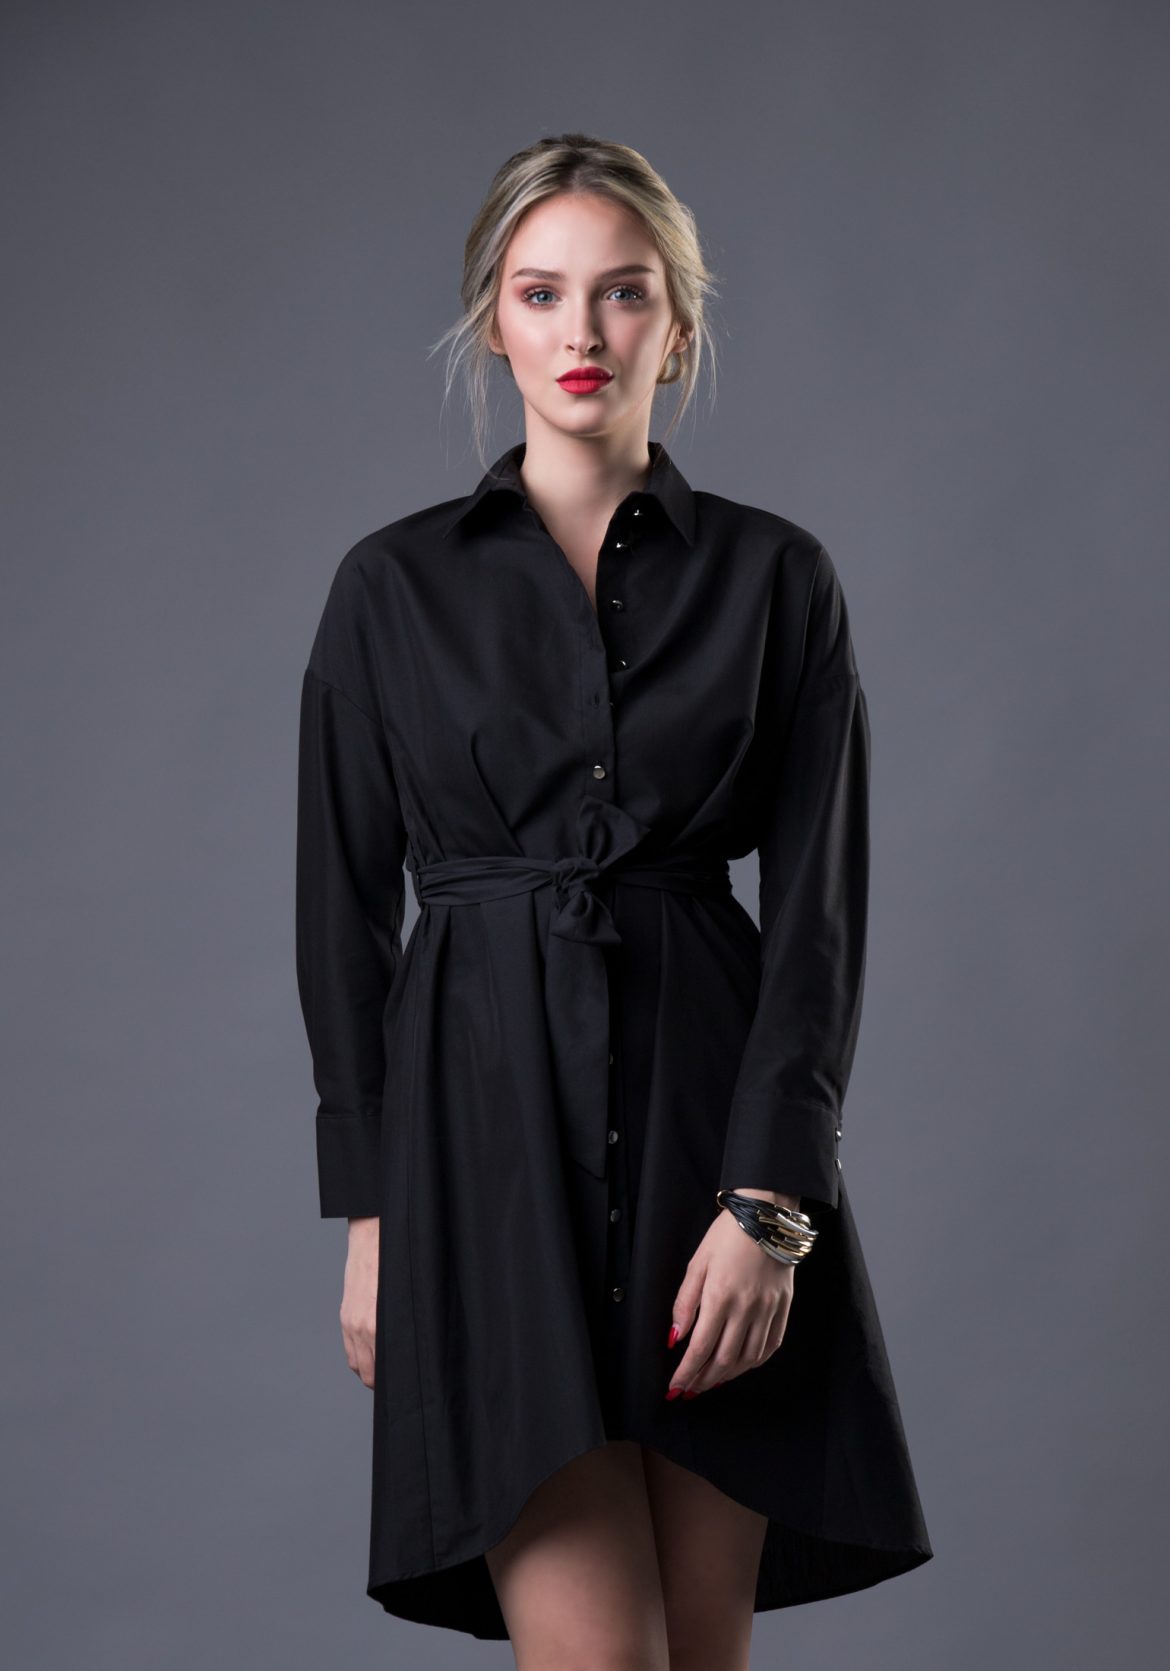 SHIRT- DRESS FOR EVERY OCCASION!